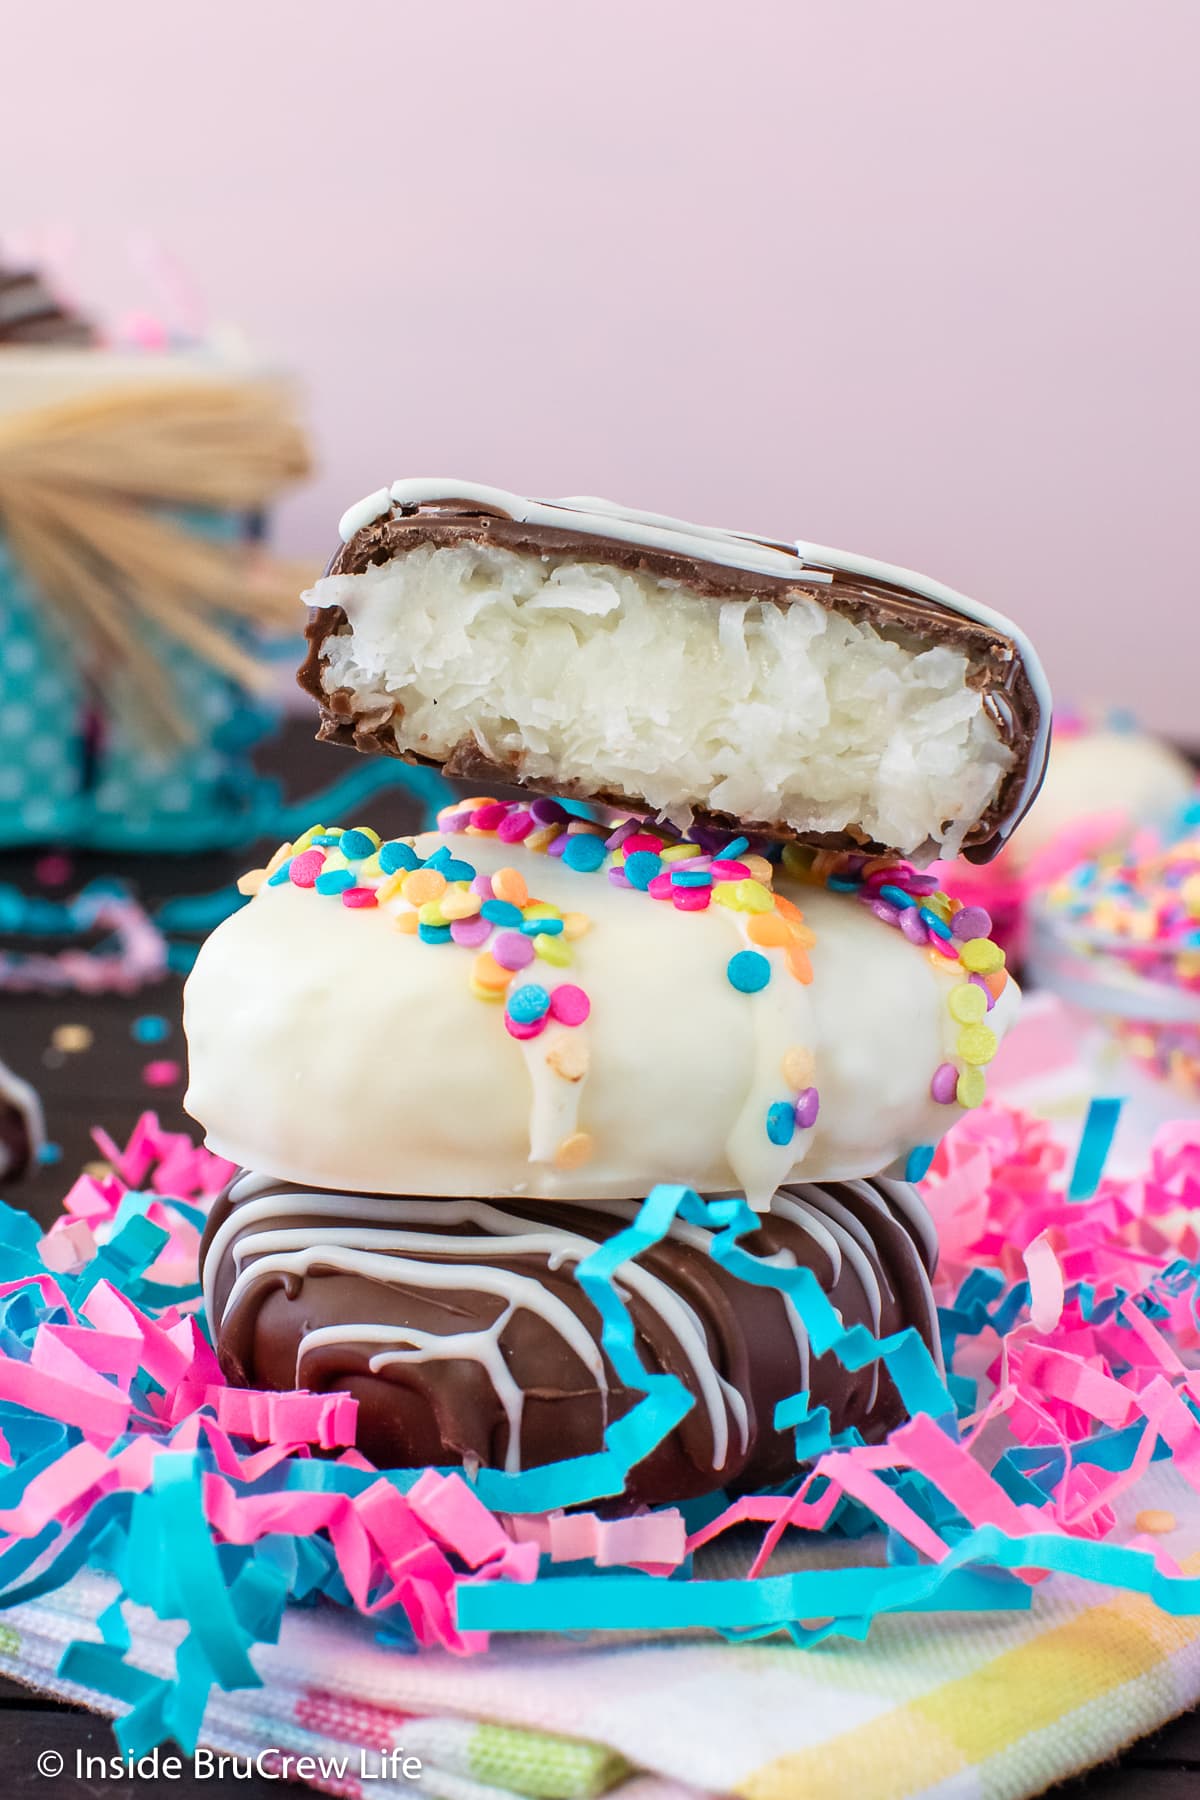 A stack of white and dark chocolate covered Easter eggs.